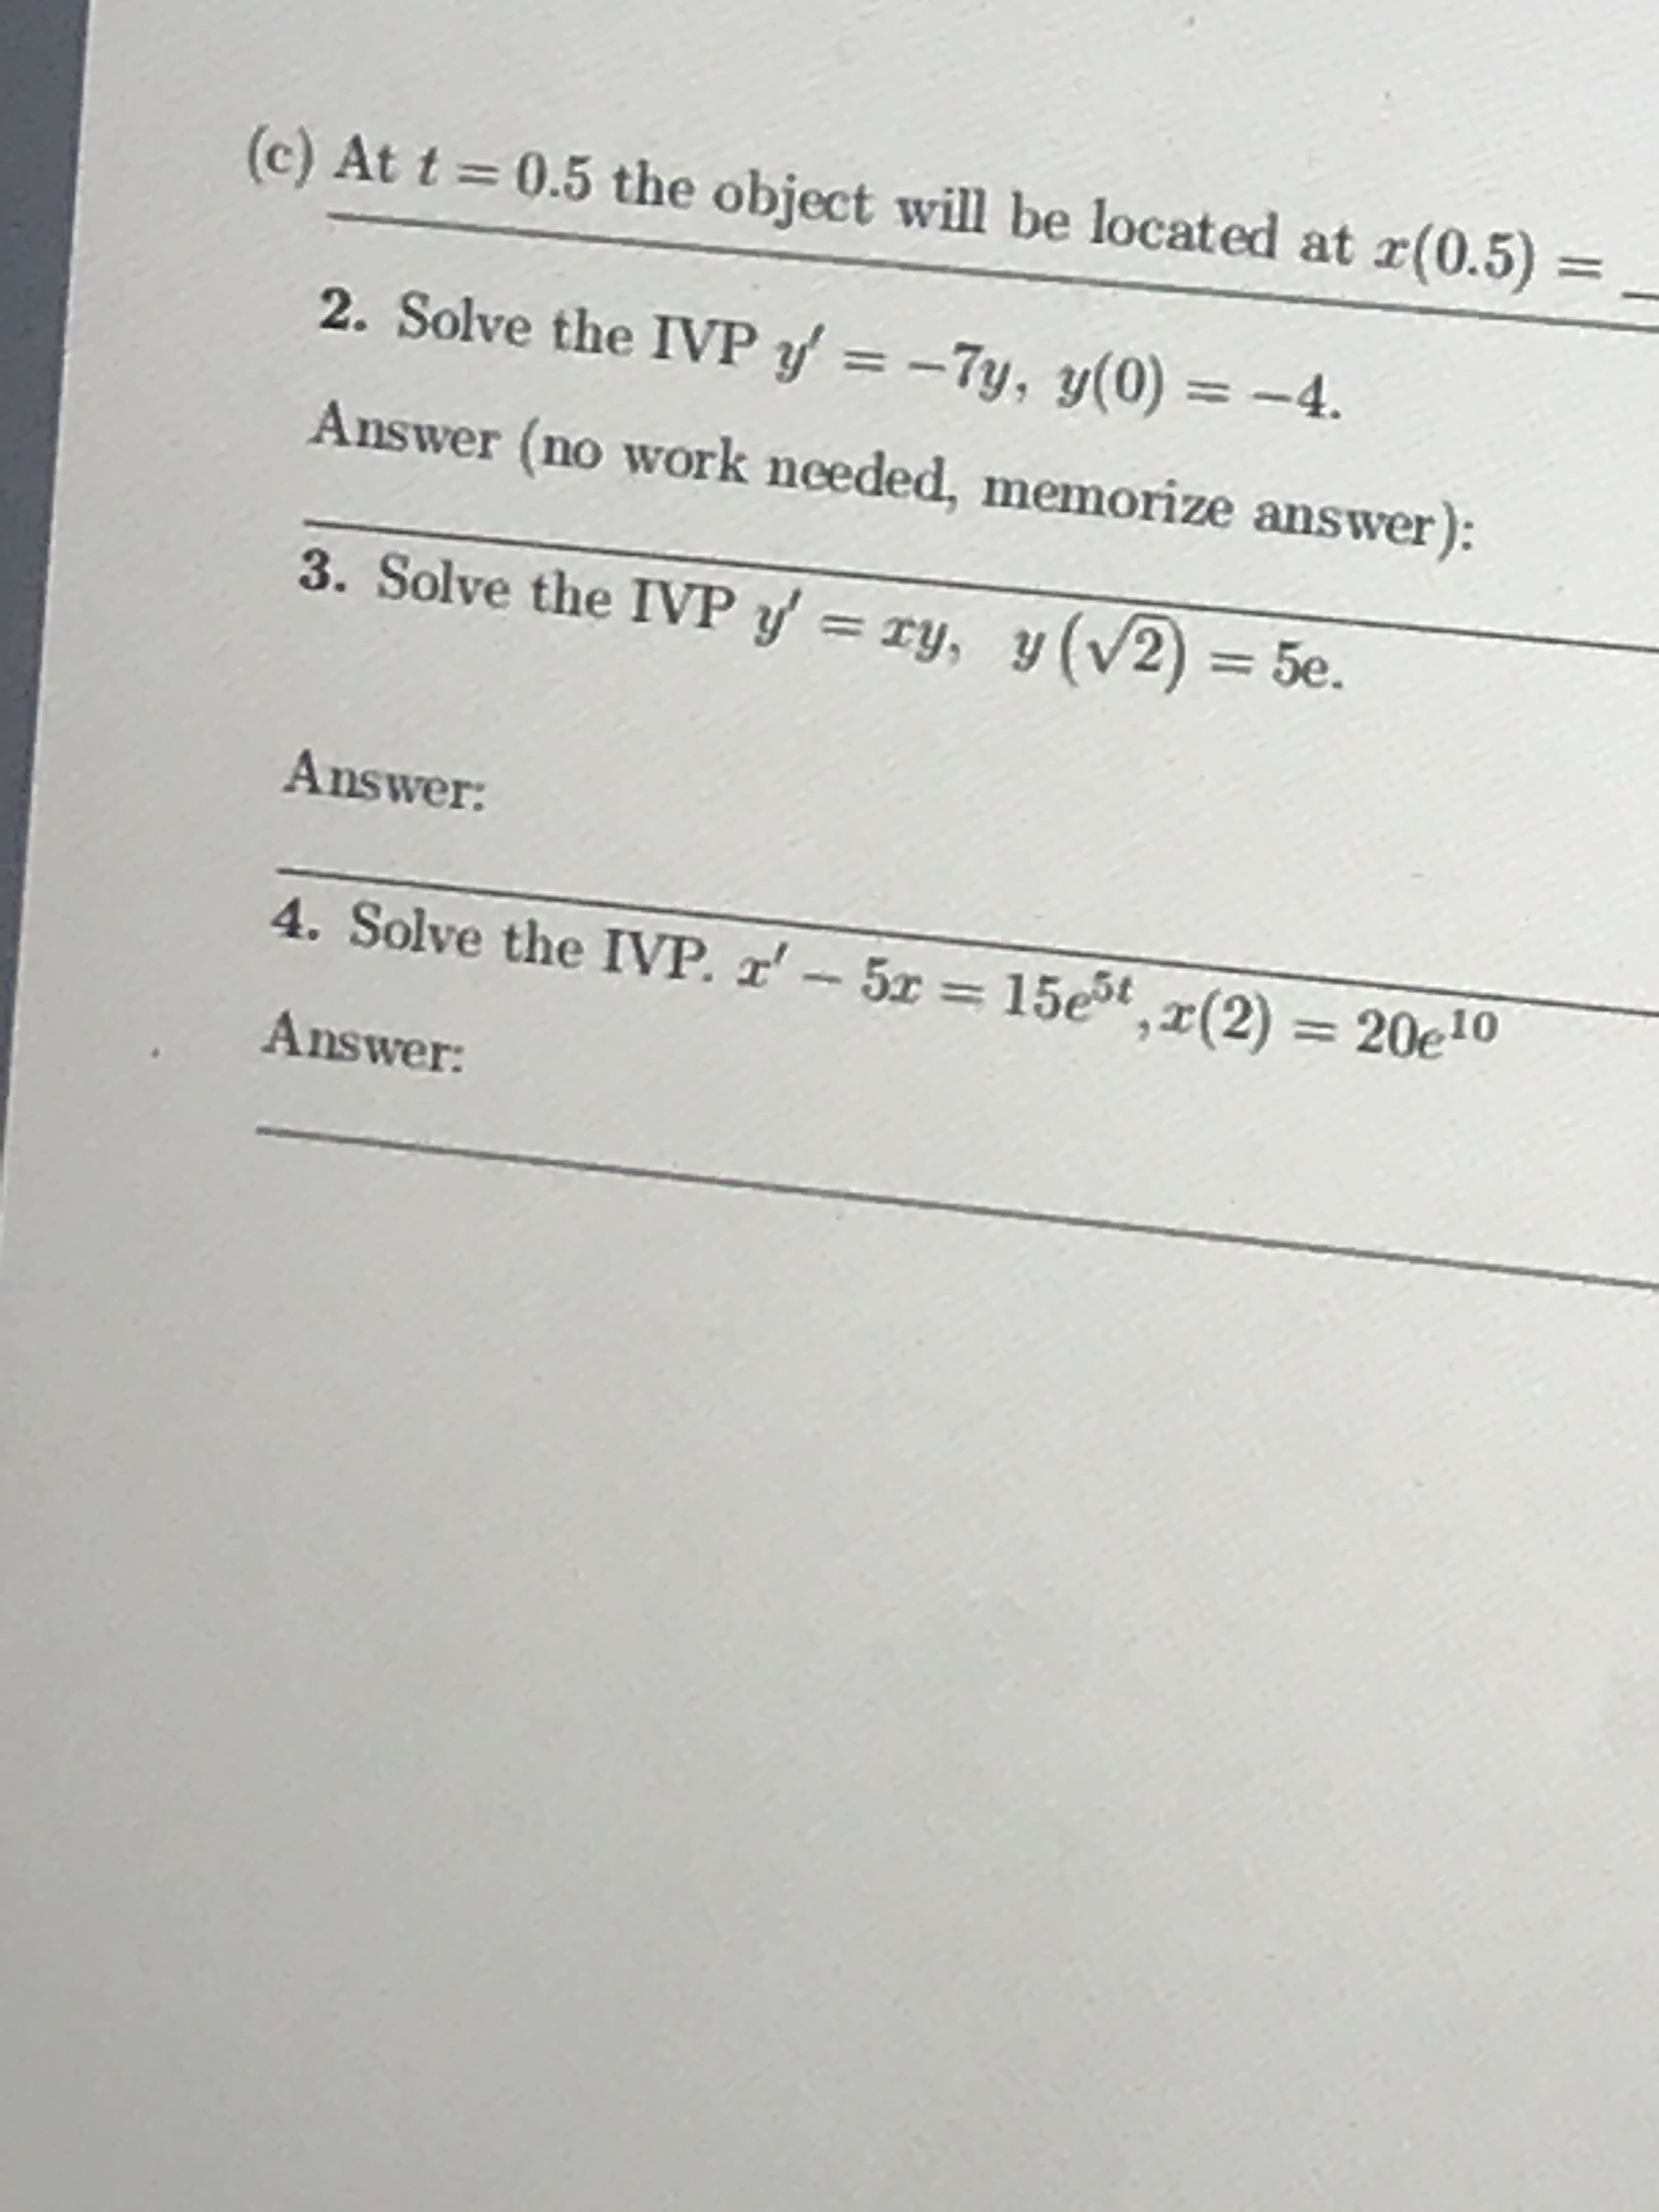 (c) At t 0.5 the object will be located at r(0.5)-
2. Solve the IVPy'=-7y, y(0)=-4.
Answer (no work nceded, memorize answer):
3. Solve the IVPy-xy, y (V2) = 5e.
Answer:
4. Solve the IVP, 2'-5x = 15e5ta(2)
Answer:
20eio
